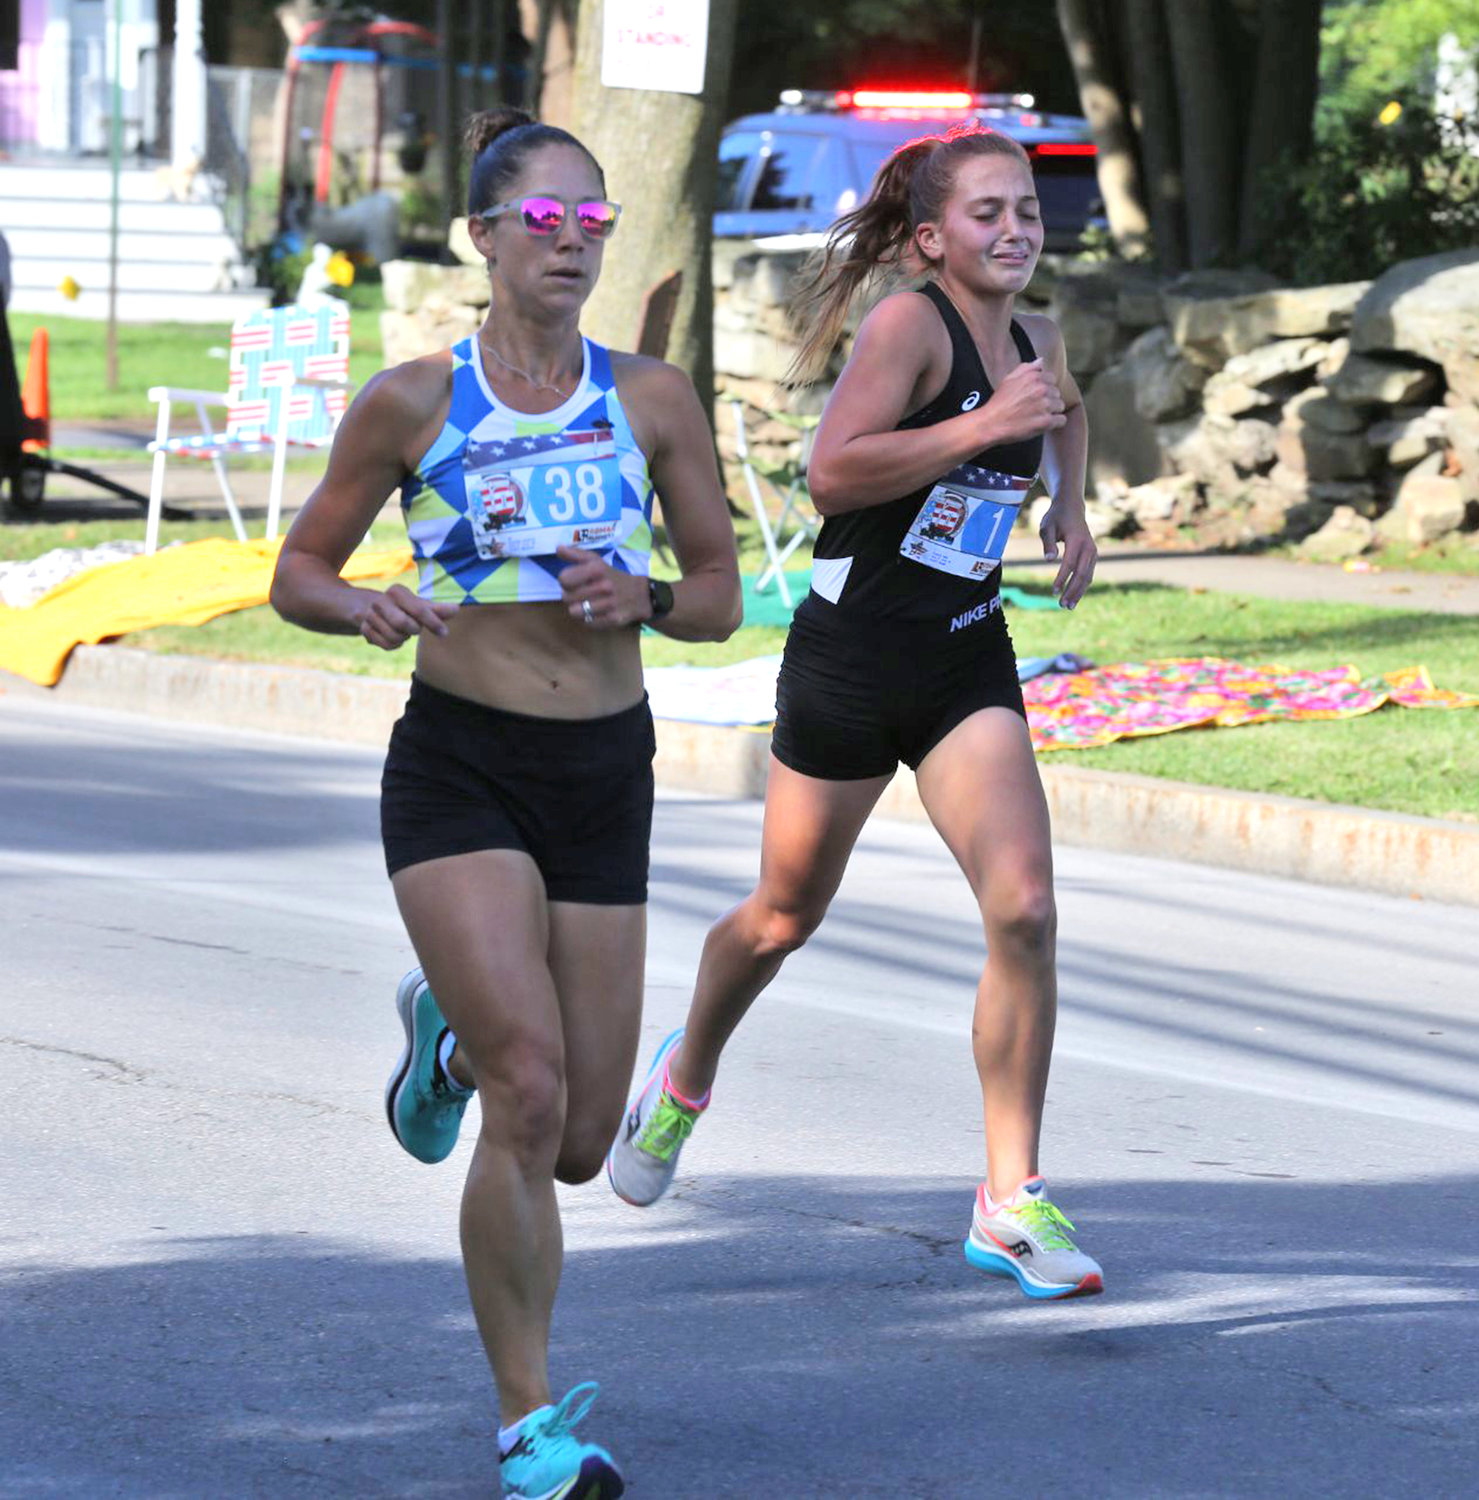 The two top finishers among female runners in Saturday’s Honor America Days 5K parade run in Rome were Jessica Charles, left, of Oriskany and Alex French of New Hartford. Charles was first among female runners and 11th overall in 19:41 and French was second and 13th, respectively, in 19:54.